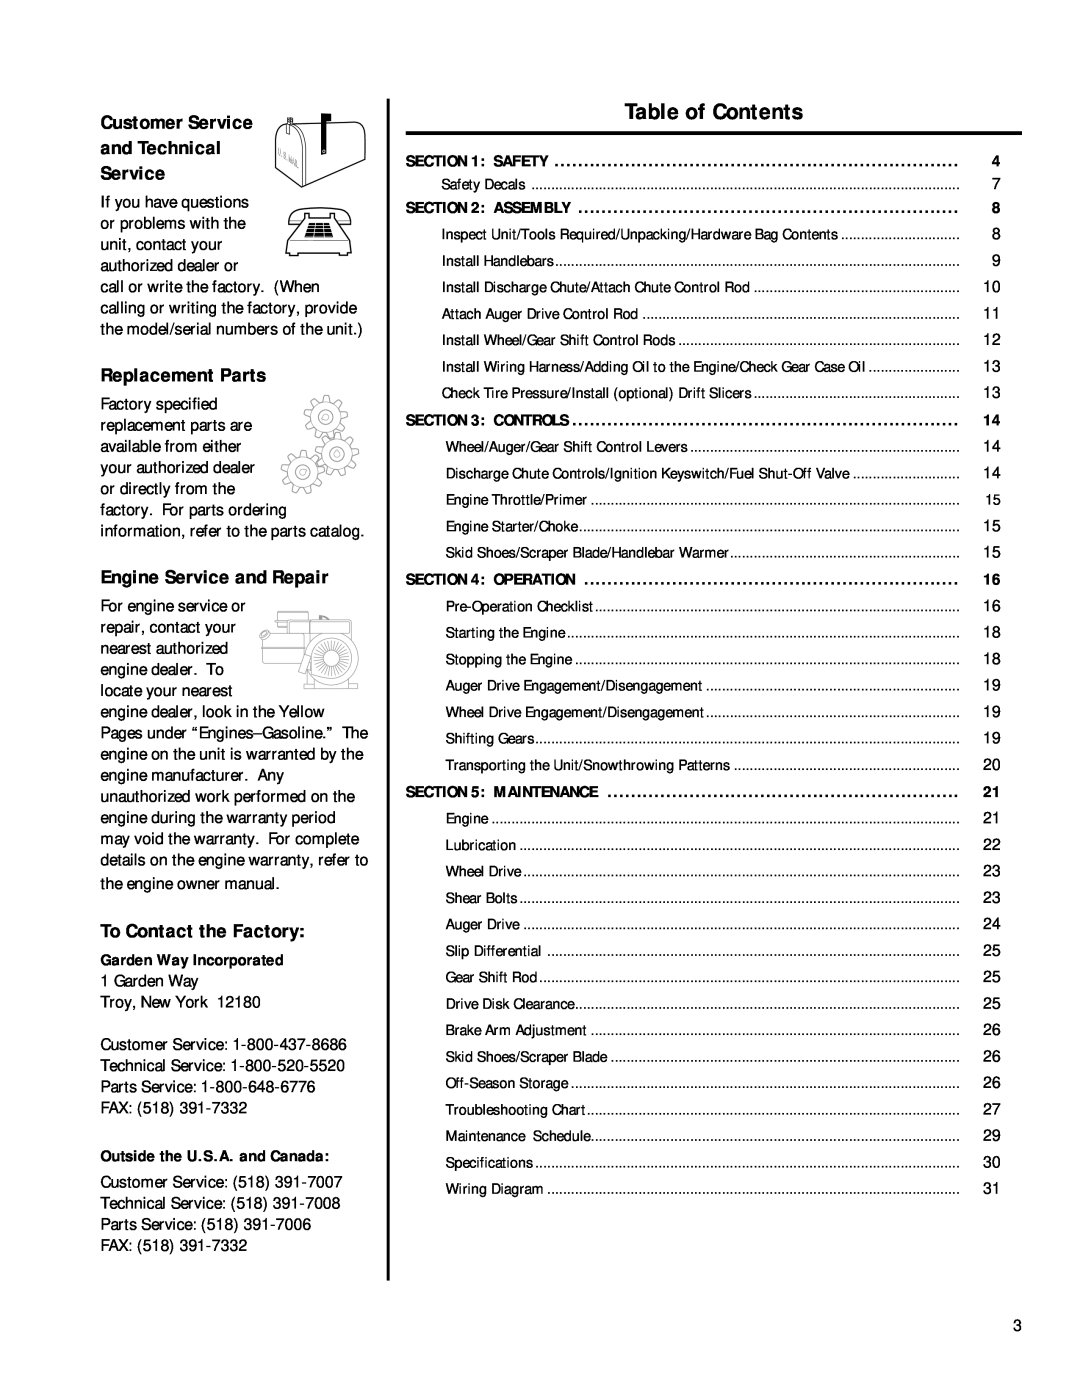 Troy-Bilt 42030 Table of Contents, Customer Service and Technical Service, Replacement Parts, Engine Service and Repair 